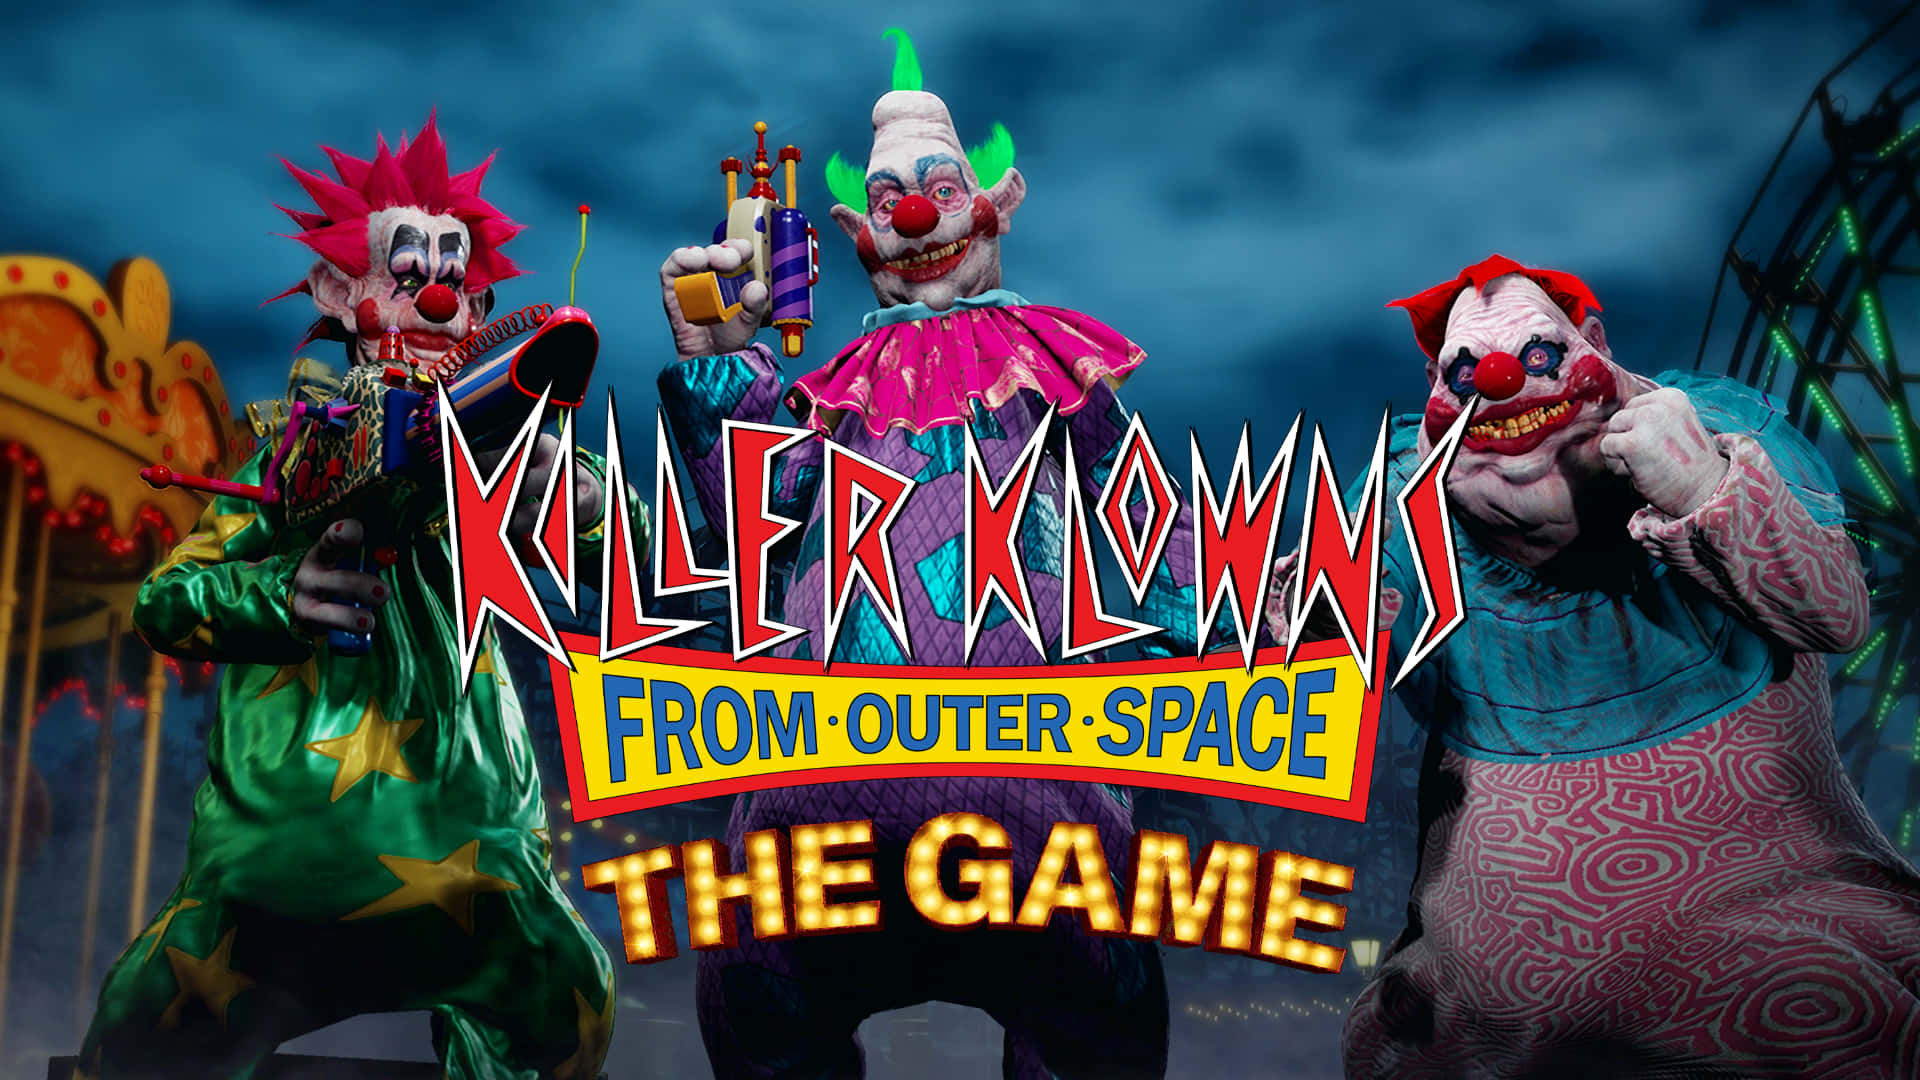 "Killer Klowns are coming from outer space to terrorize the town!" Wallpaper